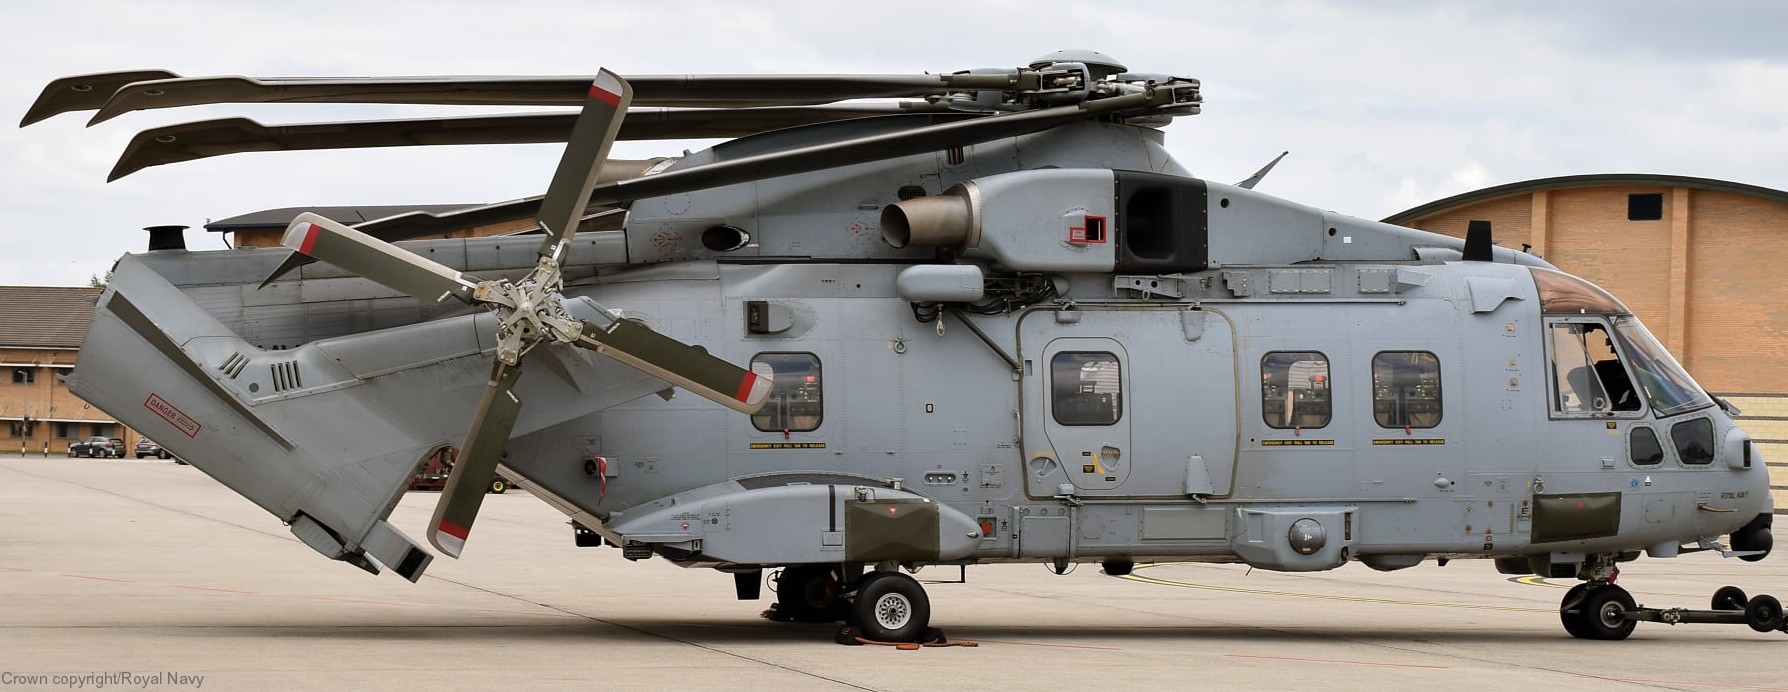 merlin hc4 mk.4 commando helicopter force chf royal navy 845 846 naval air squadron rnas yeovilton aw101 03